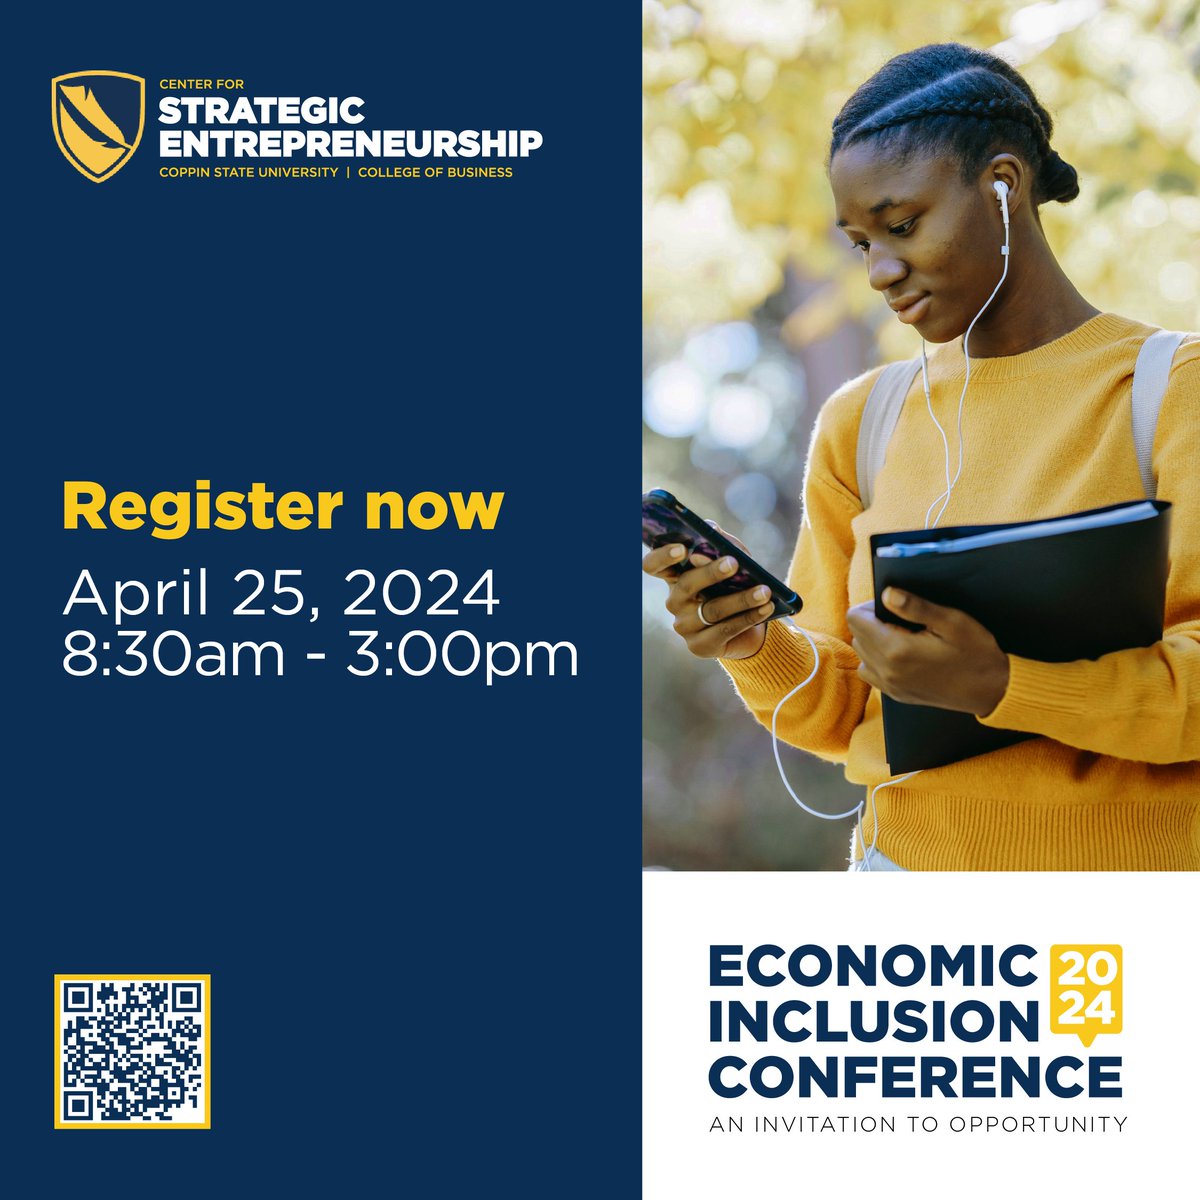 Join us at the Economic Inclusion Conference at Coppin State University on Thursday, April 25th, from 8:30am to 3:00pm. Register now: eicac2024.eventbrite.com #EICAC2024 #Entrepreneurship